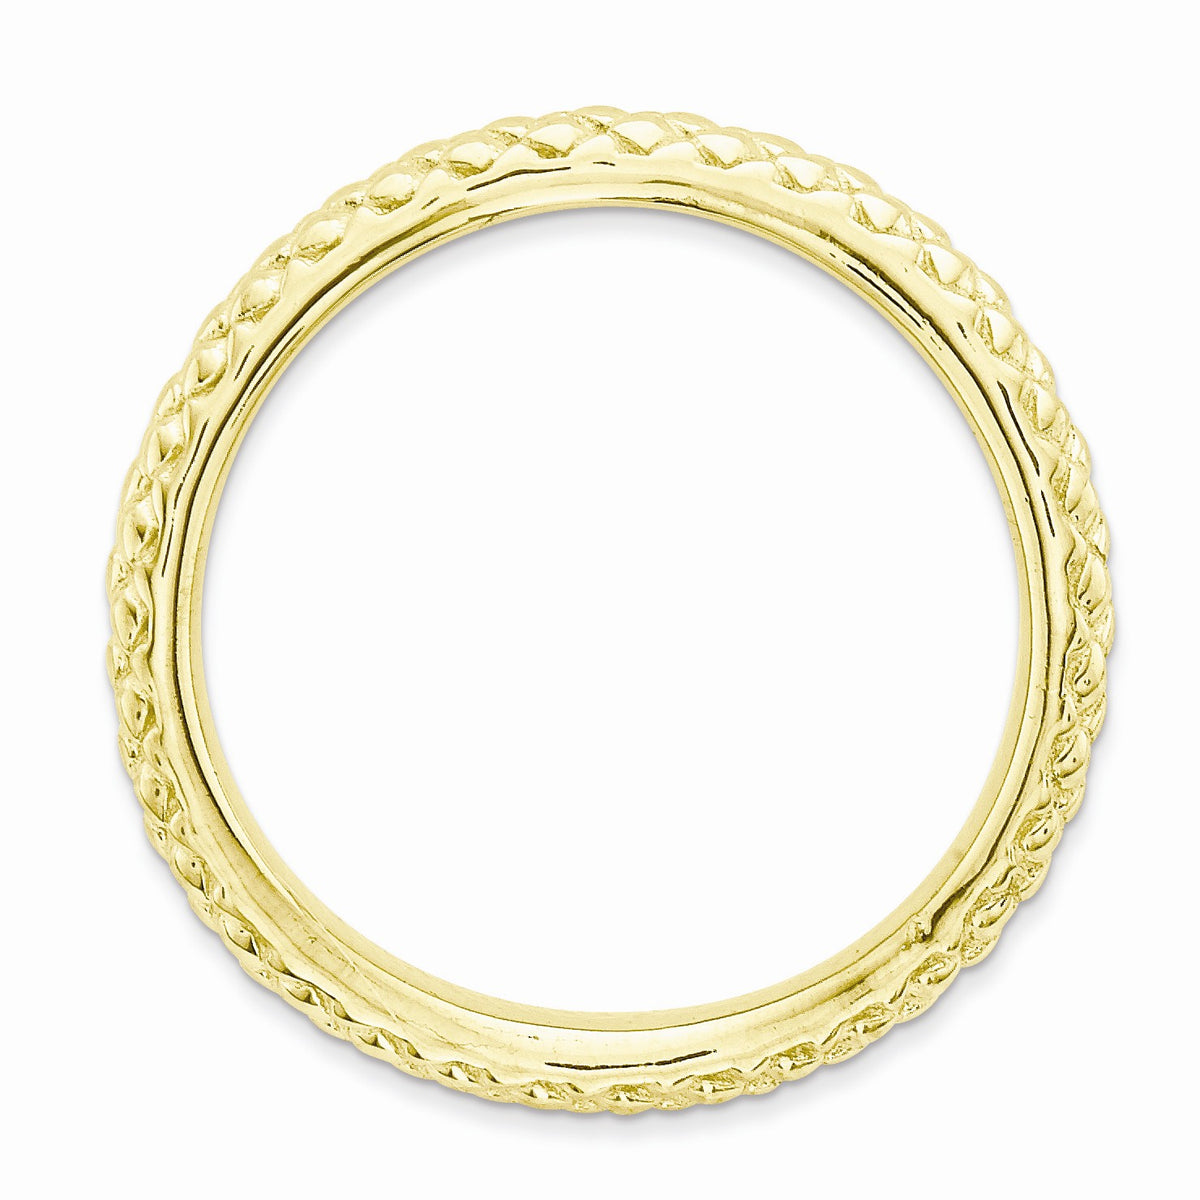 Alternate view of the 2.25mm Stackable 14K Yellow Gold Plated Silver Curved Textured Band by The Black Bow Jewelry Co.